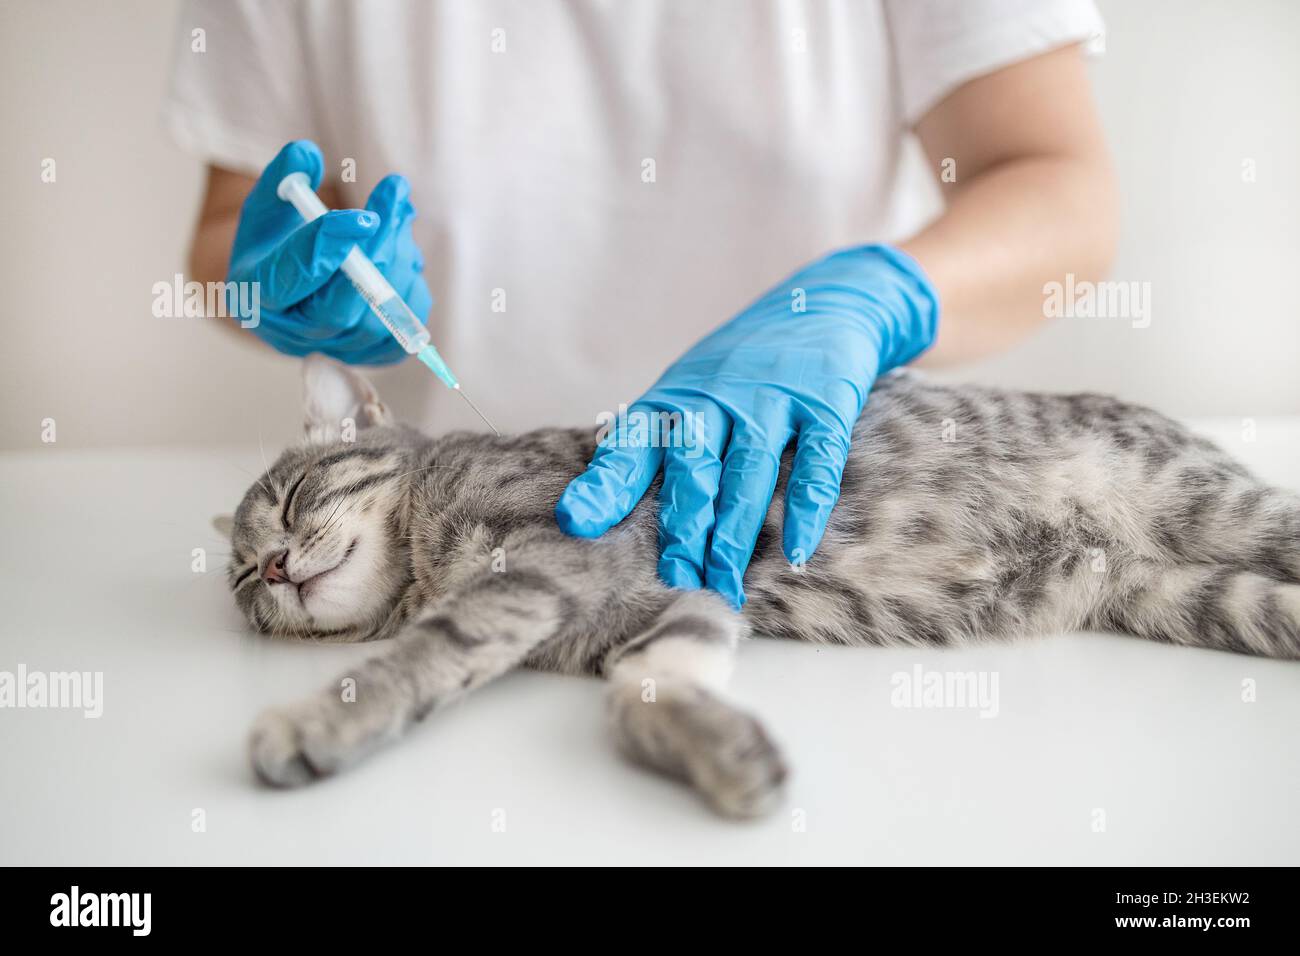 Veterinarian doctor or nurse in a medical rubber glove makes an injection with a medicine for the prevention of disease. Stock Photo